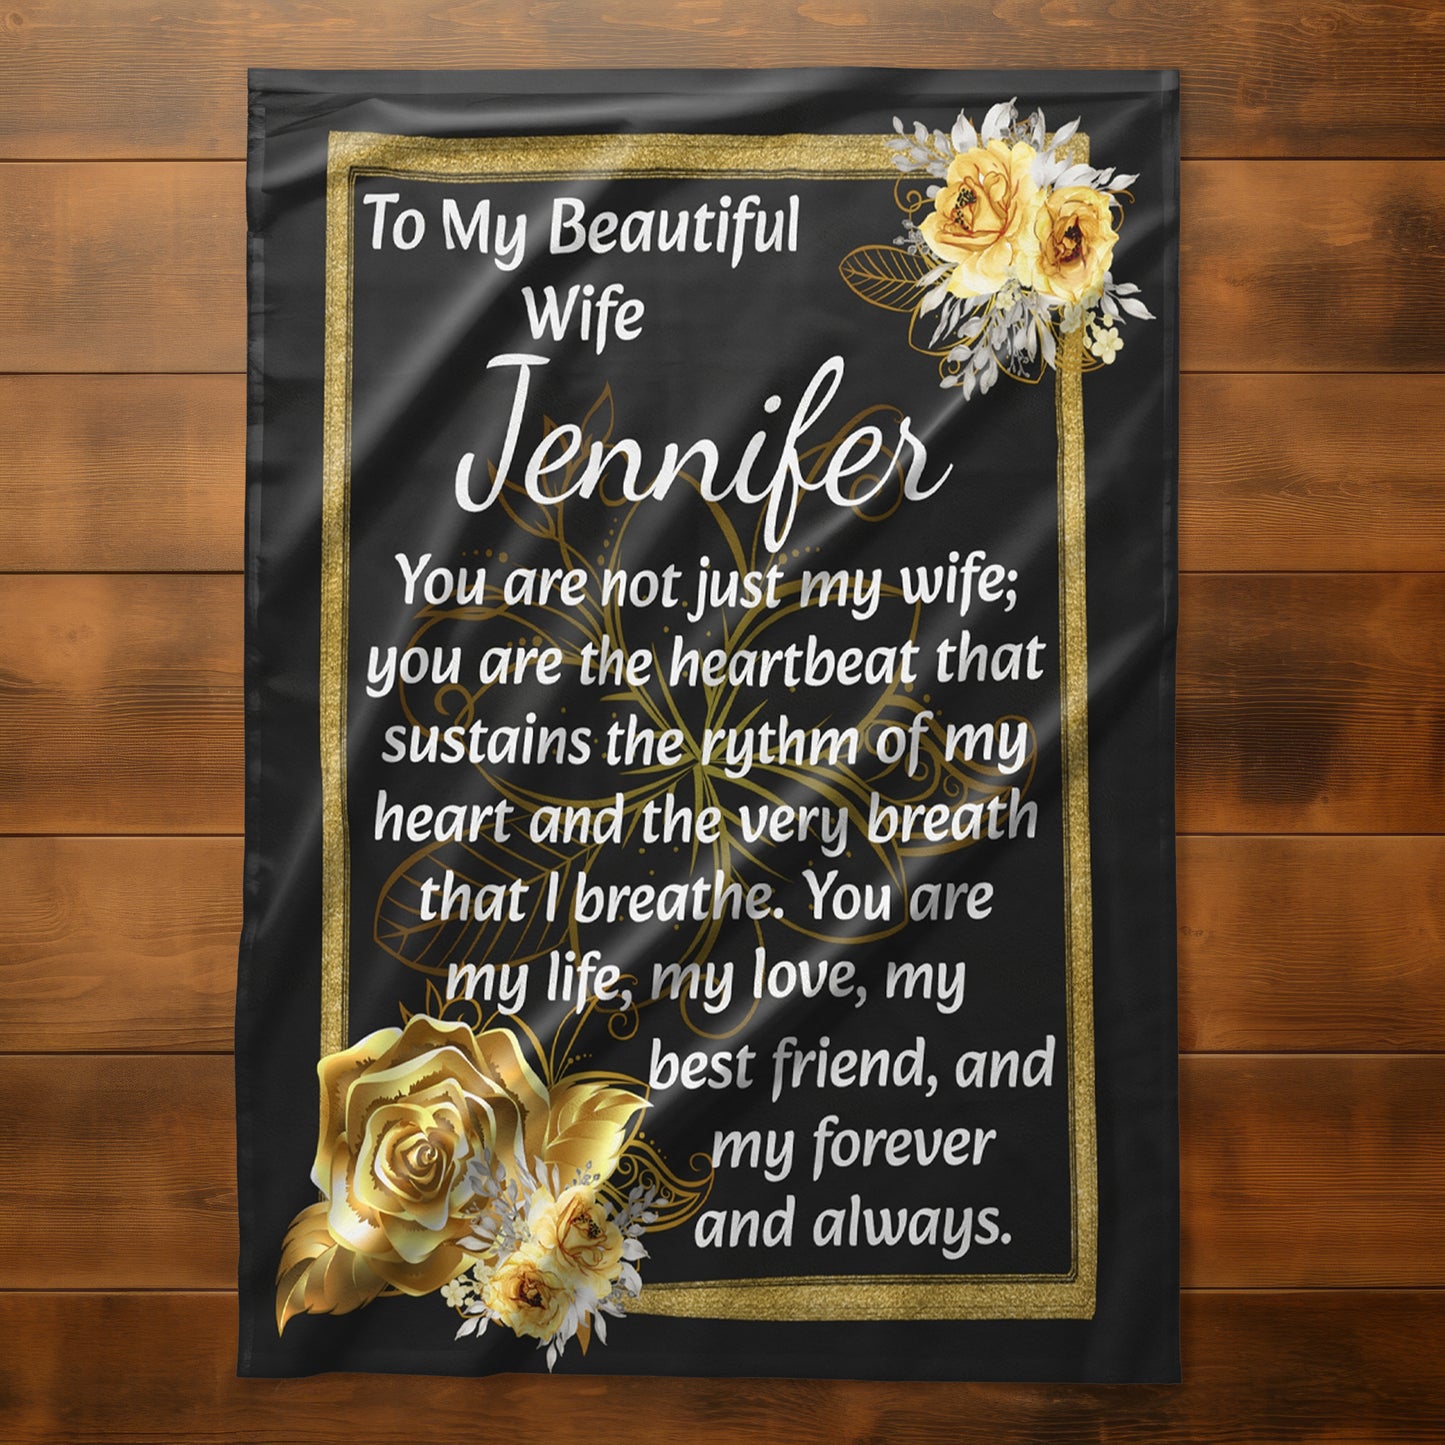 Personalized lightweight blanket for wife, anniversary gift for wife, throw blanket for wife, gift for wife from husband